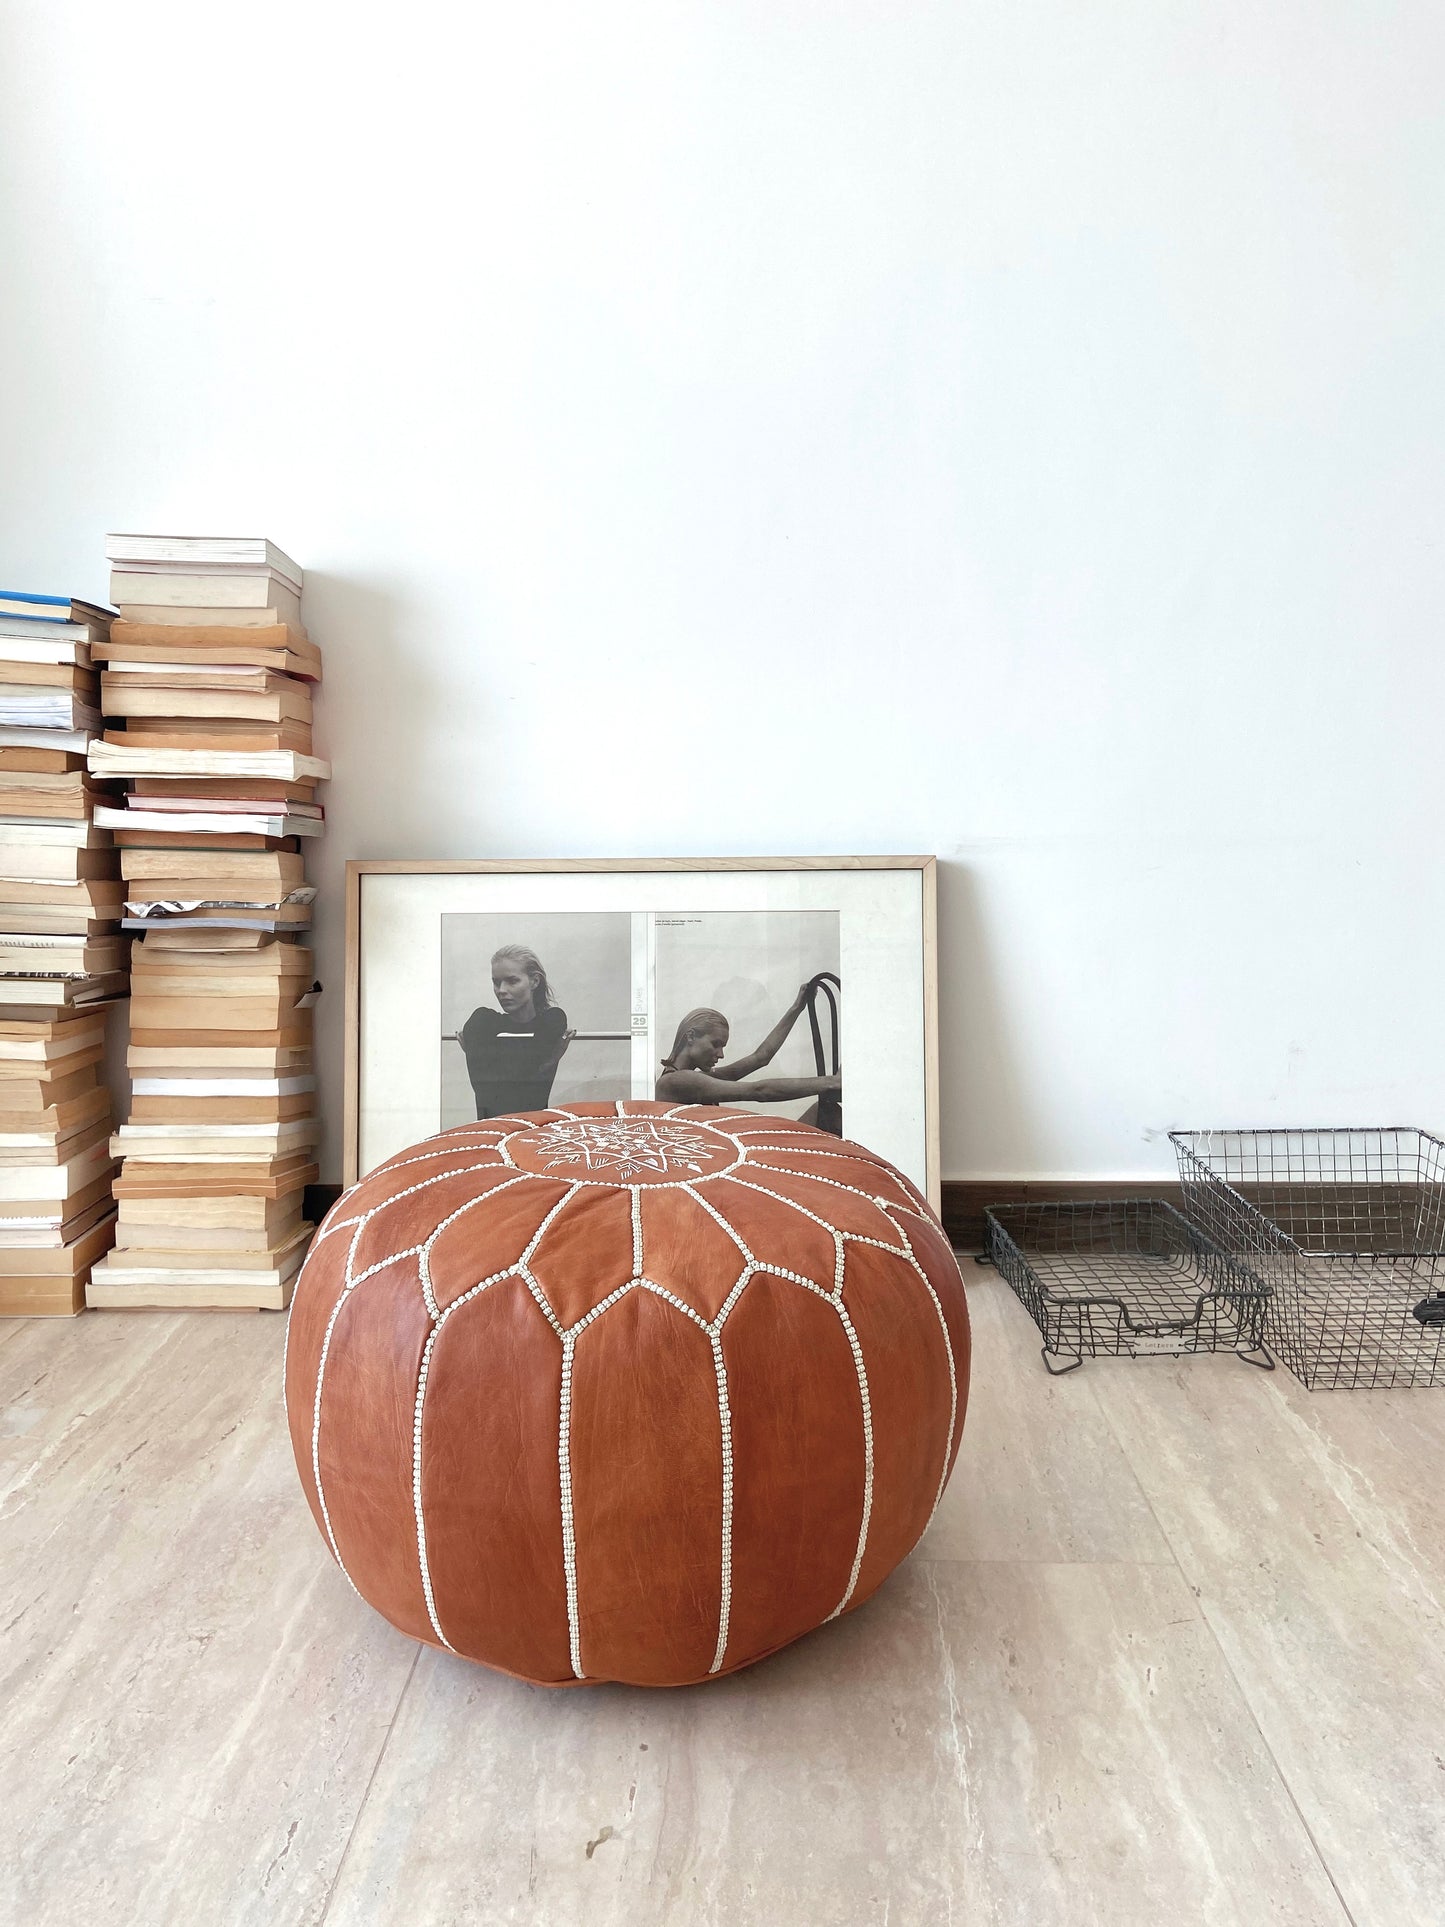 Leather Poufs Brown Pre-stuffed / Buy More Than 1, Get 5% OFF